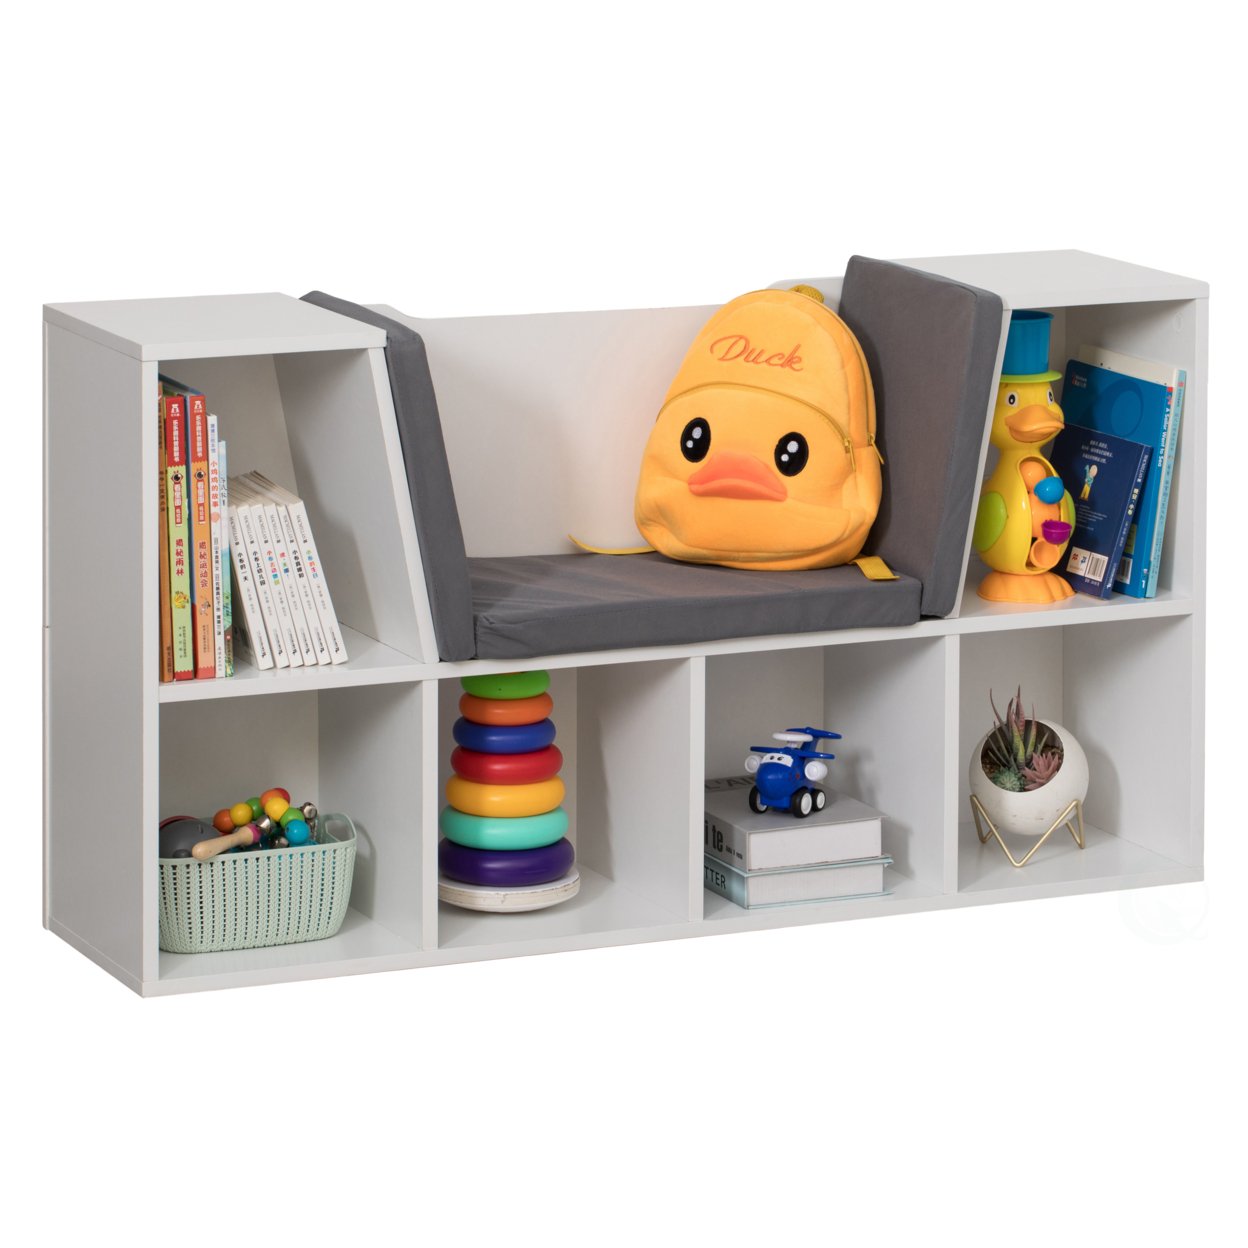 Modern Multi-Purpose Bookshelf with Storage Space and Gray Cushioned Reading Nook - white